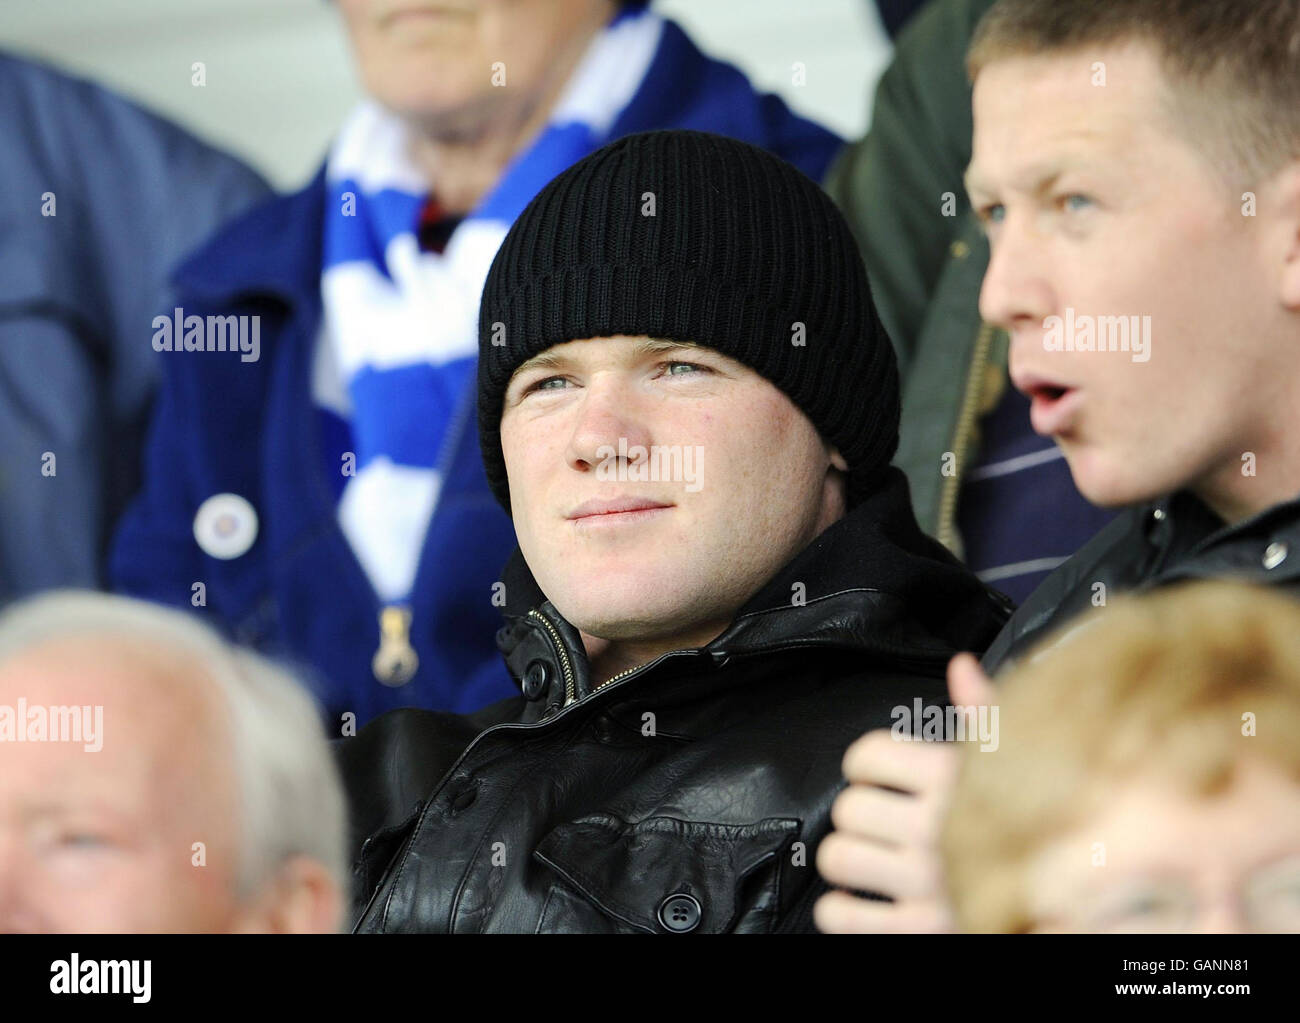 Manchester United's Wayne Rooney takes his place in the stand during the Coca-Cola League Two match at Moss Rose Stadium, Macclesfields. Stock Photo